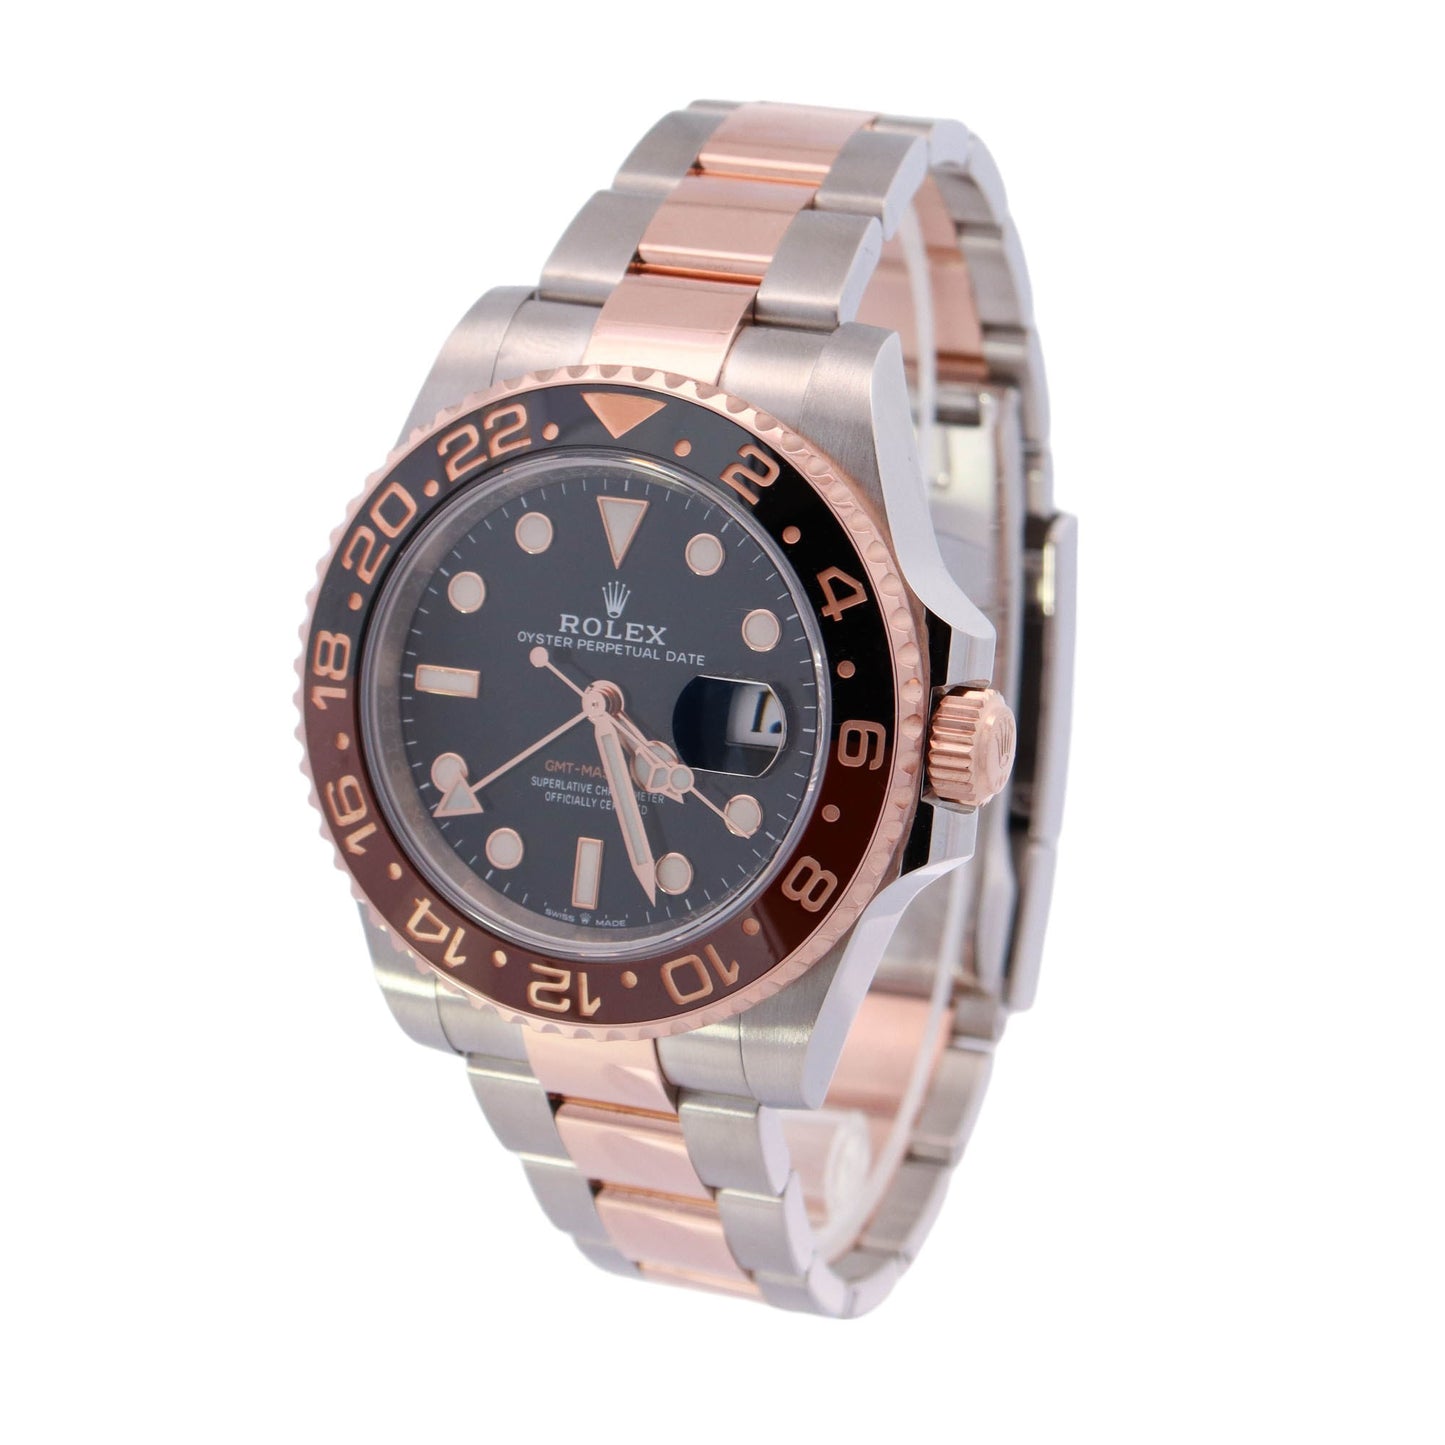 Rolex GMT Master II "Rootbeer" 40mm Everose Gold & Stainless Steel Black Dot Dial Watch Reference# 126711CHNR - Happy Jewelers Fine Jewelry Lifetime Warranty